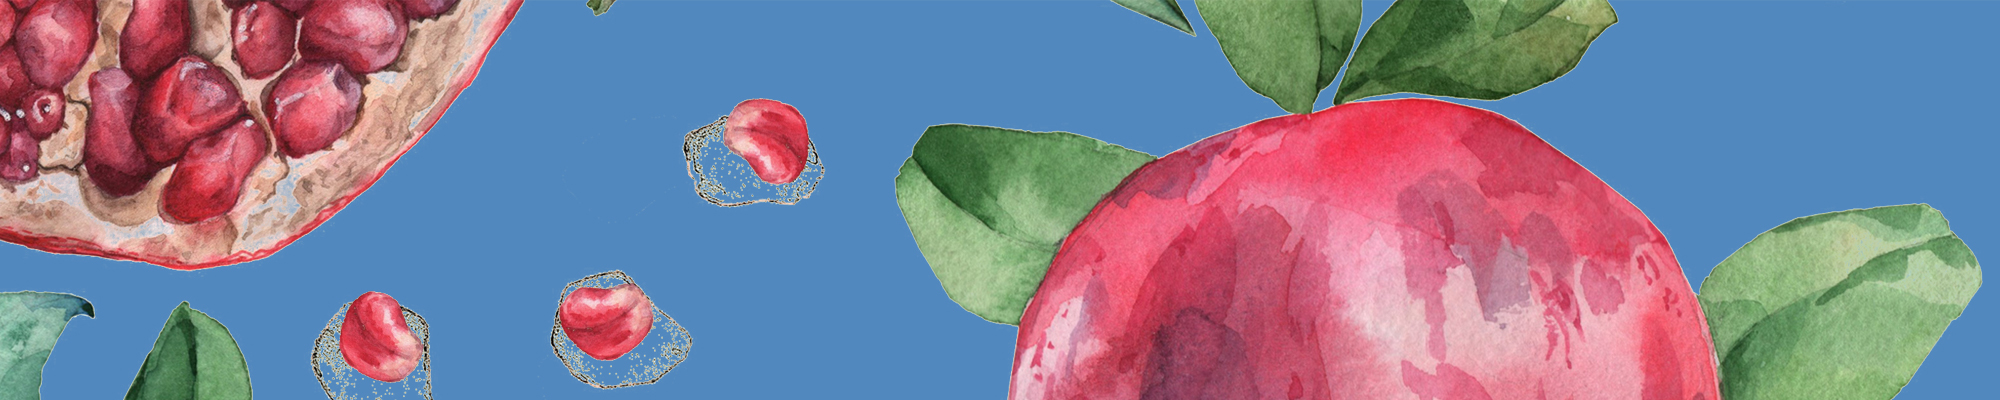 banner_pomegranate-and-clove